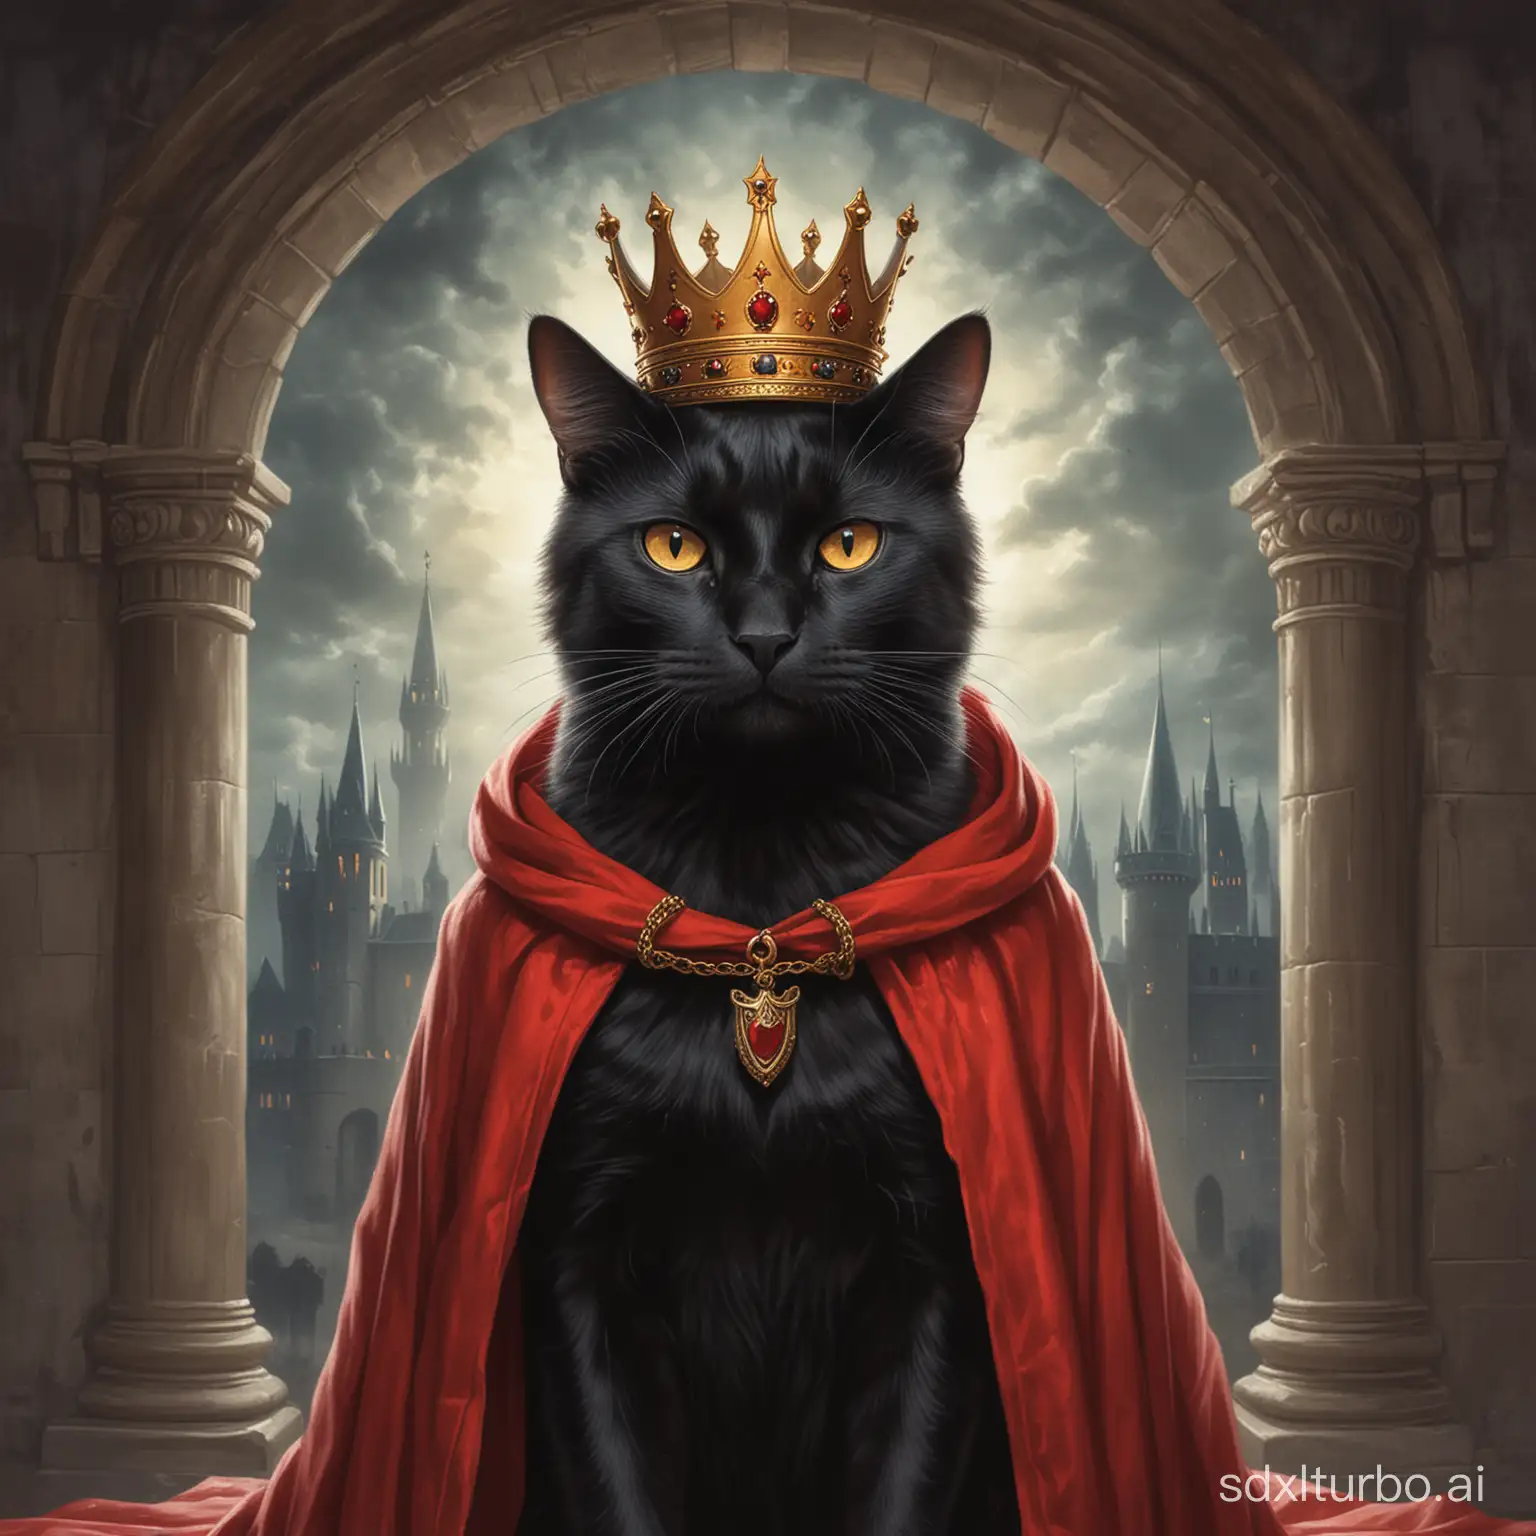 Draw an illustration of a black cat that has a crown, a red cloak, and behind it a kingdom of cats